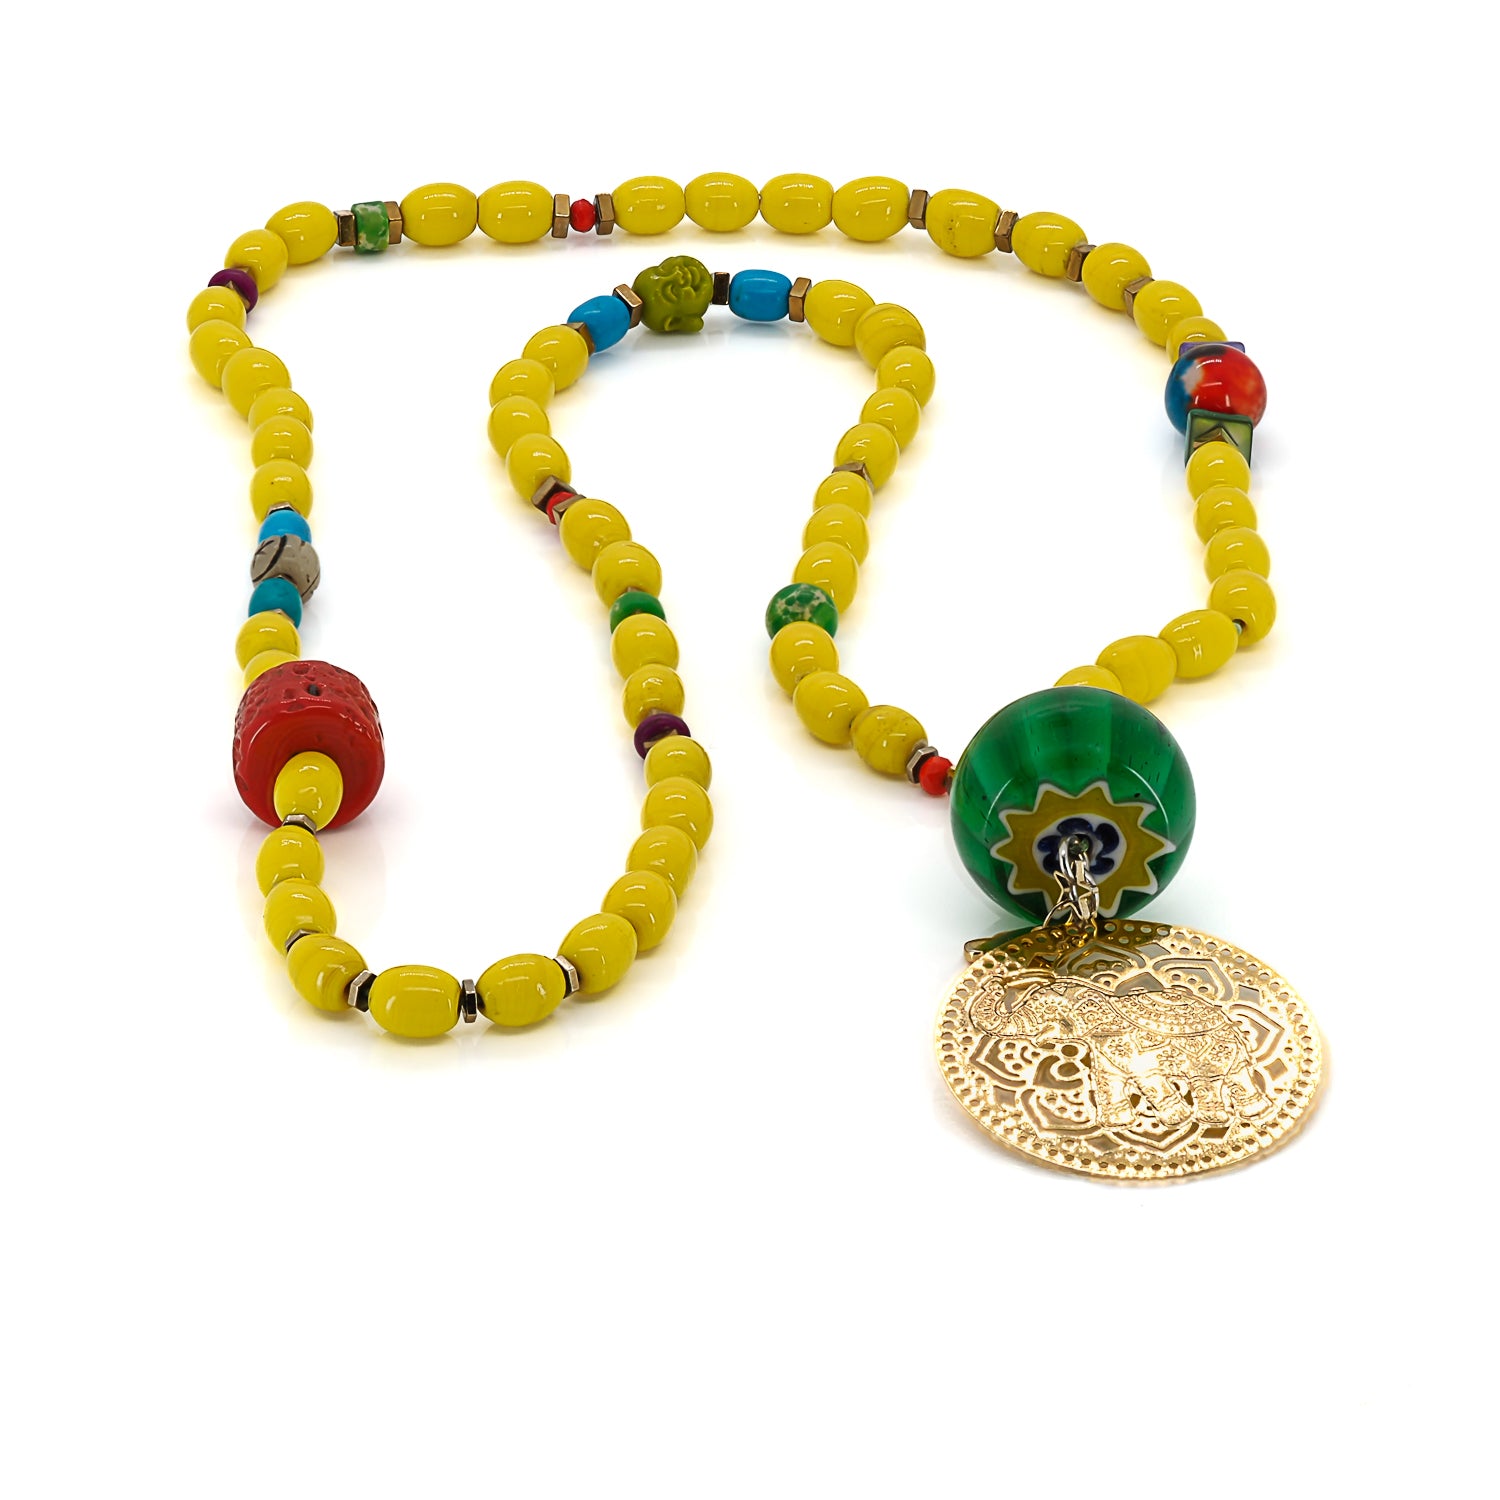 Handcrafted African Yellow Beads - A harmonious blend of colorful elements.